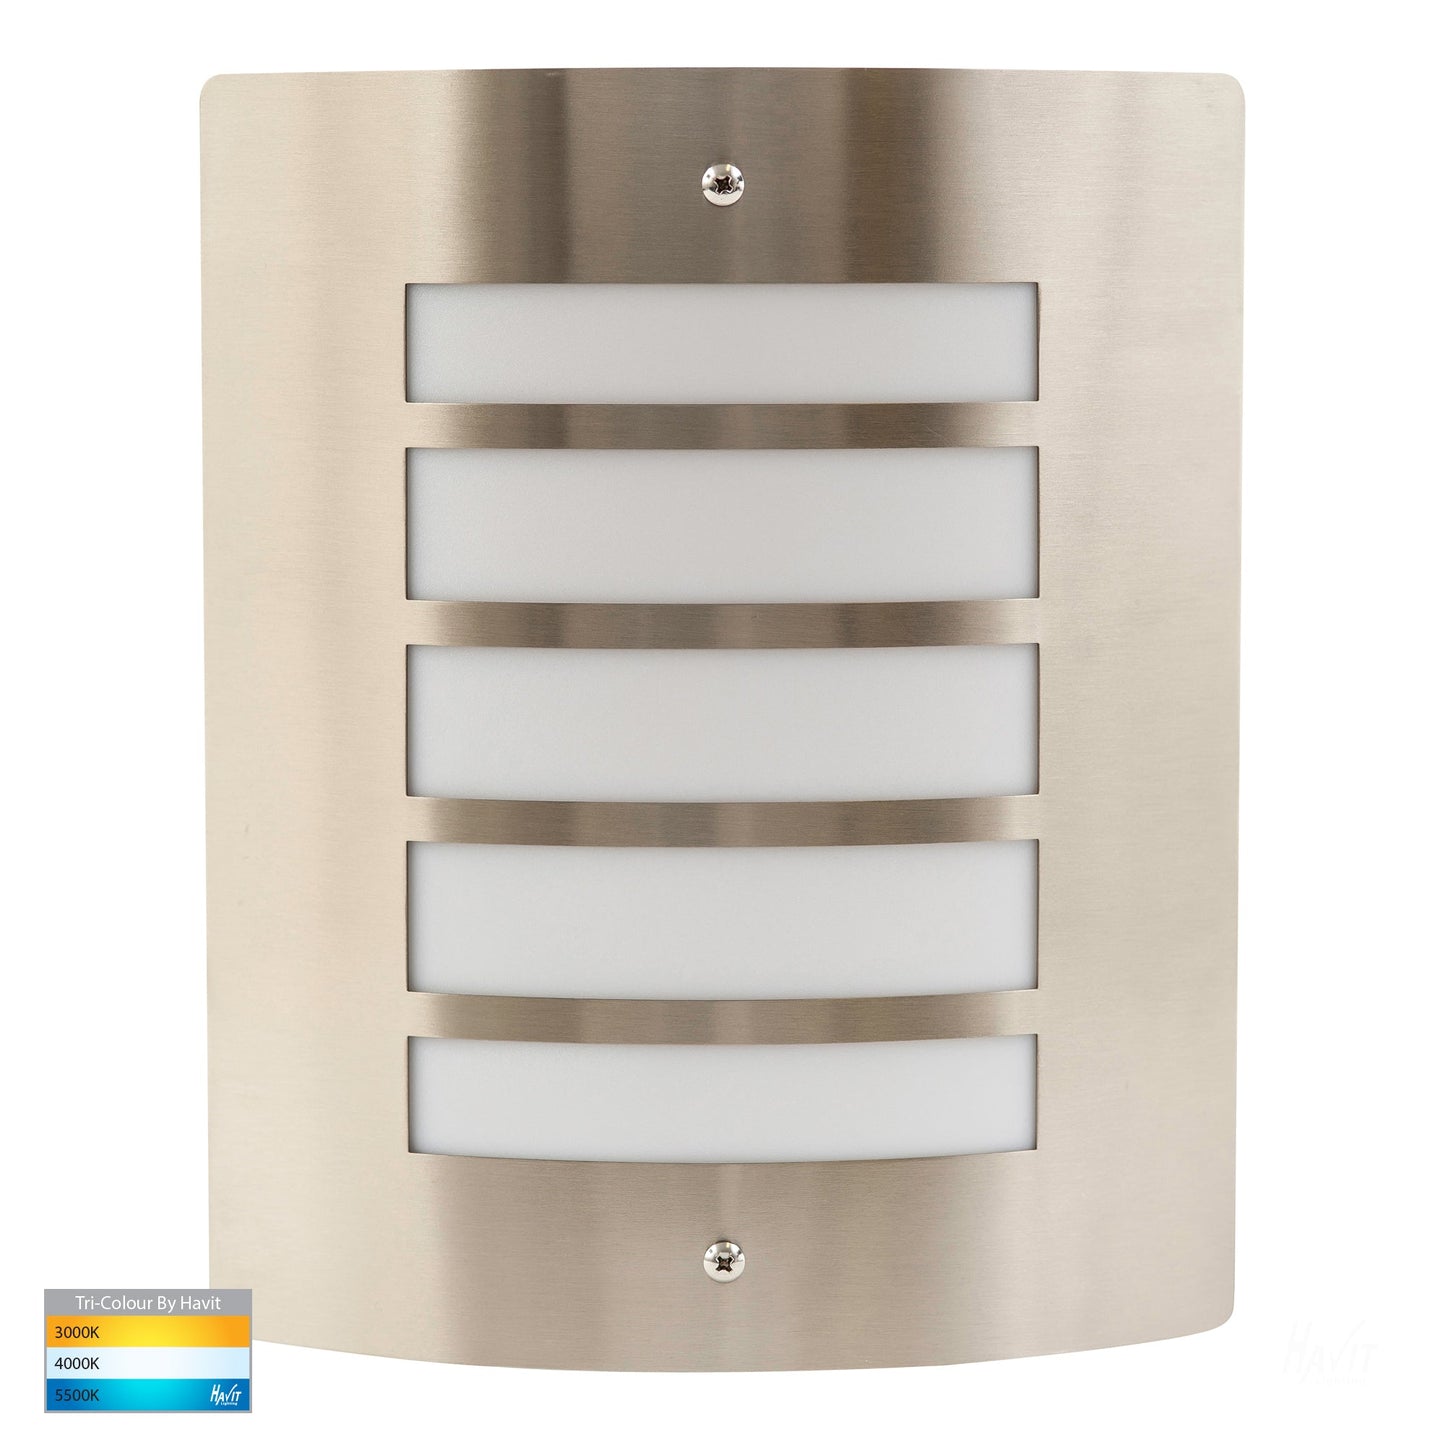 Stainless Steel Marine Grade 316 Mask Wall Light Five Slots With Opal Diffuser 